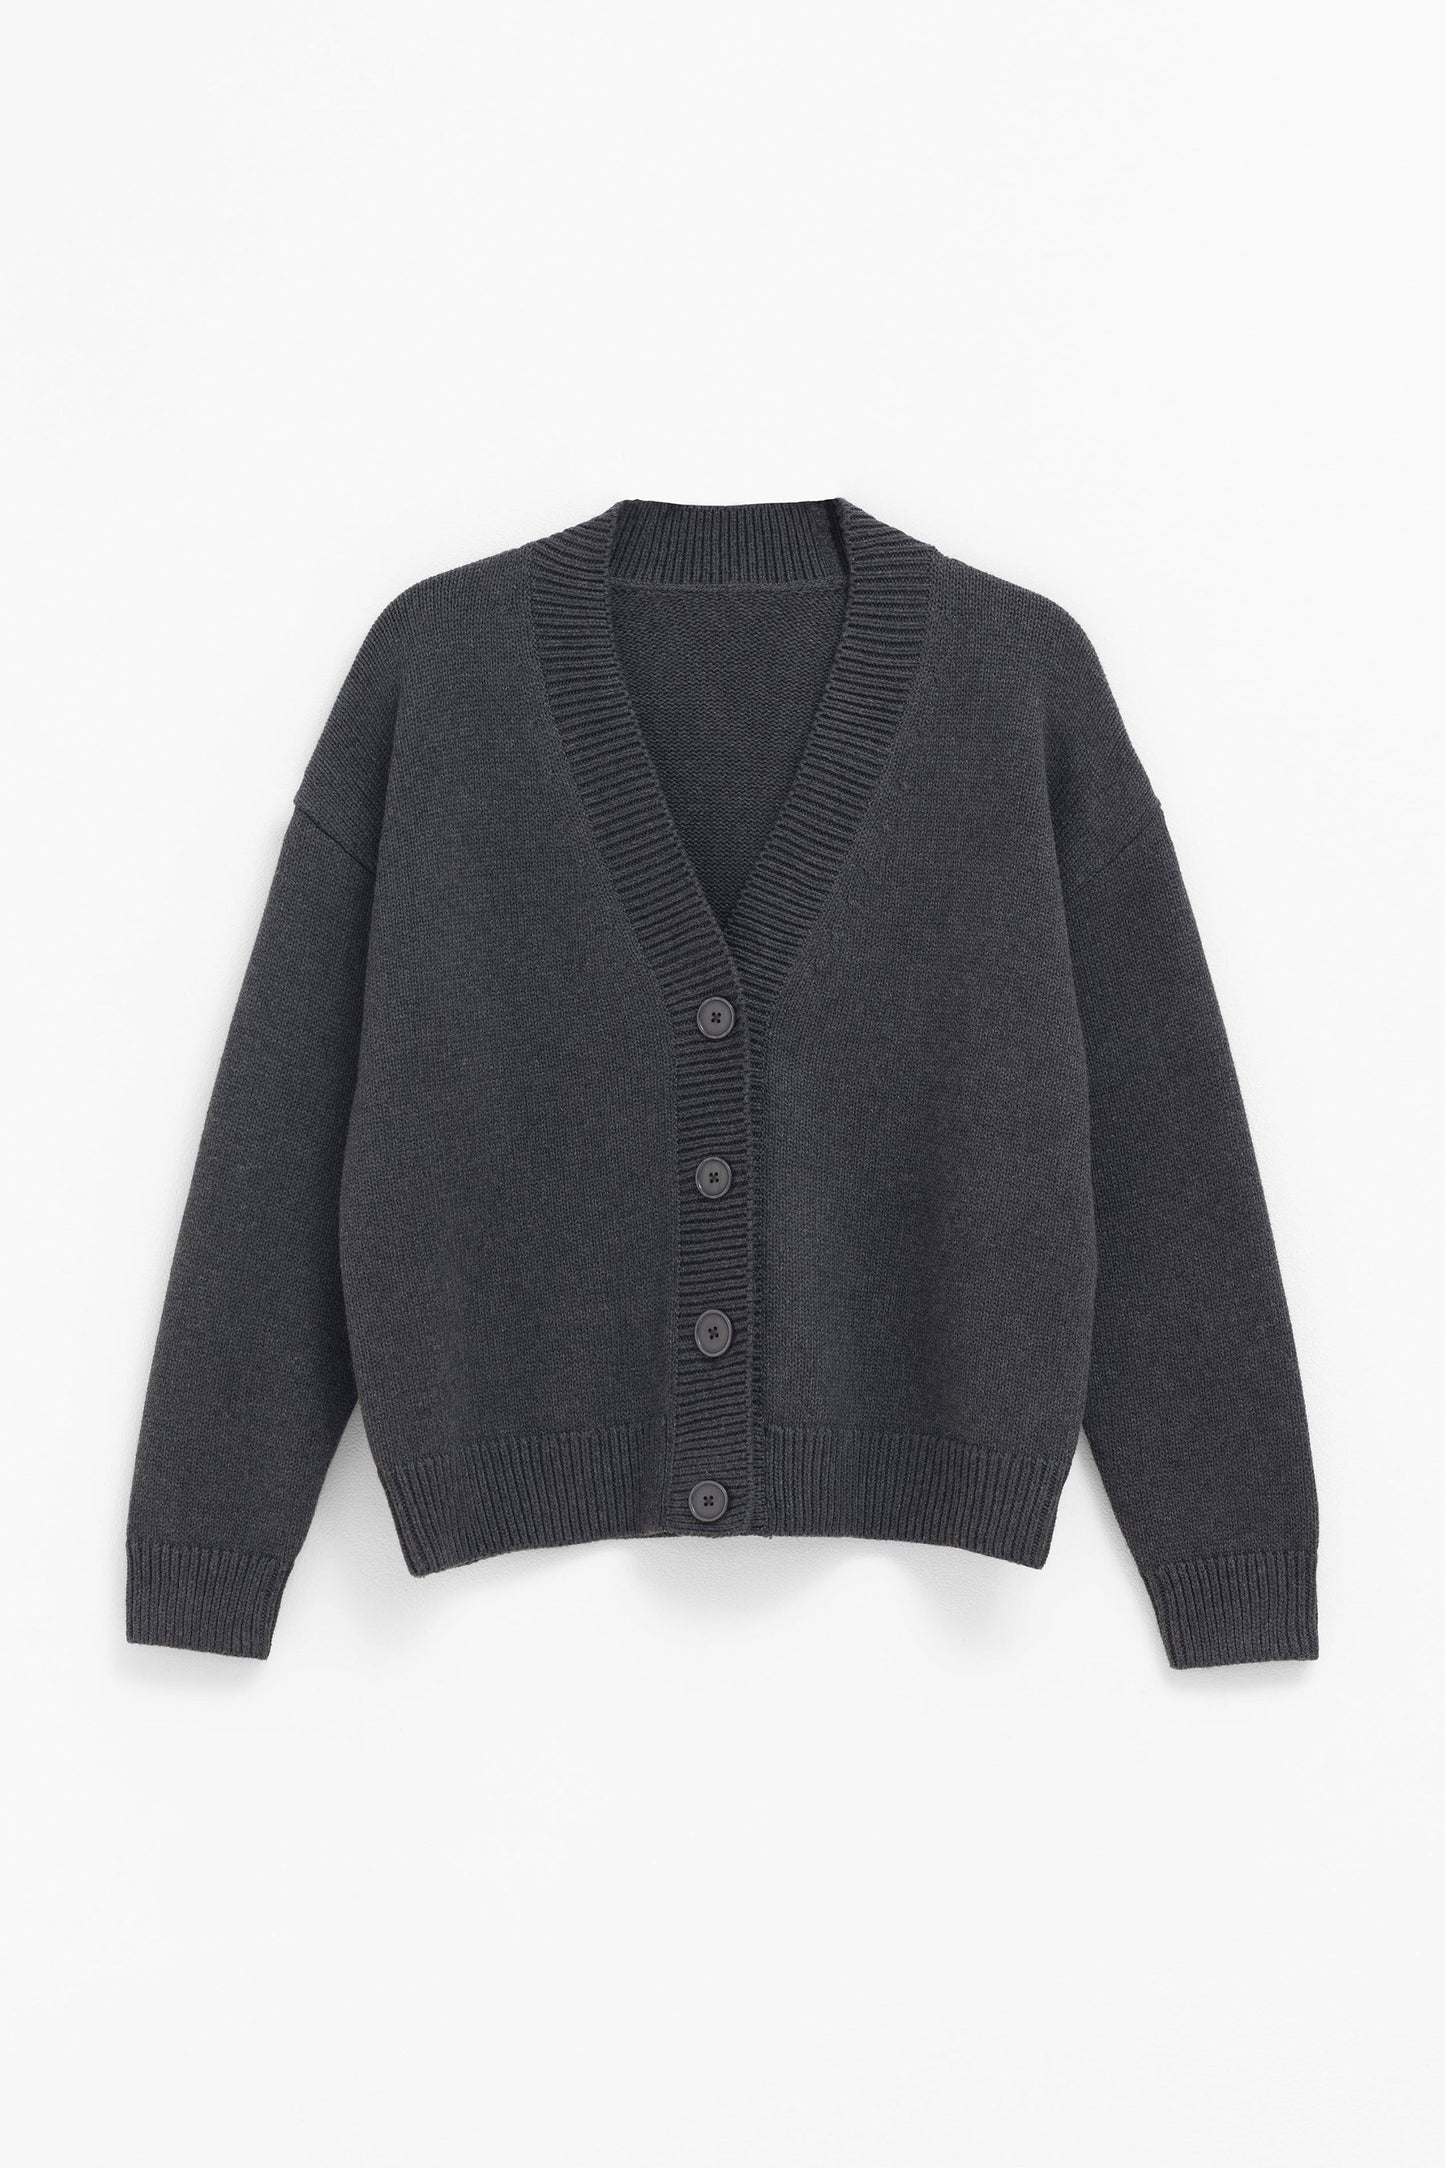 Willow Organic Cotton Everyday Knit Cardigan Front | CHARCOAL MARLE